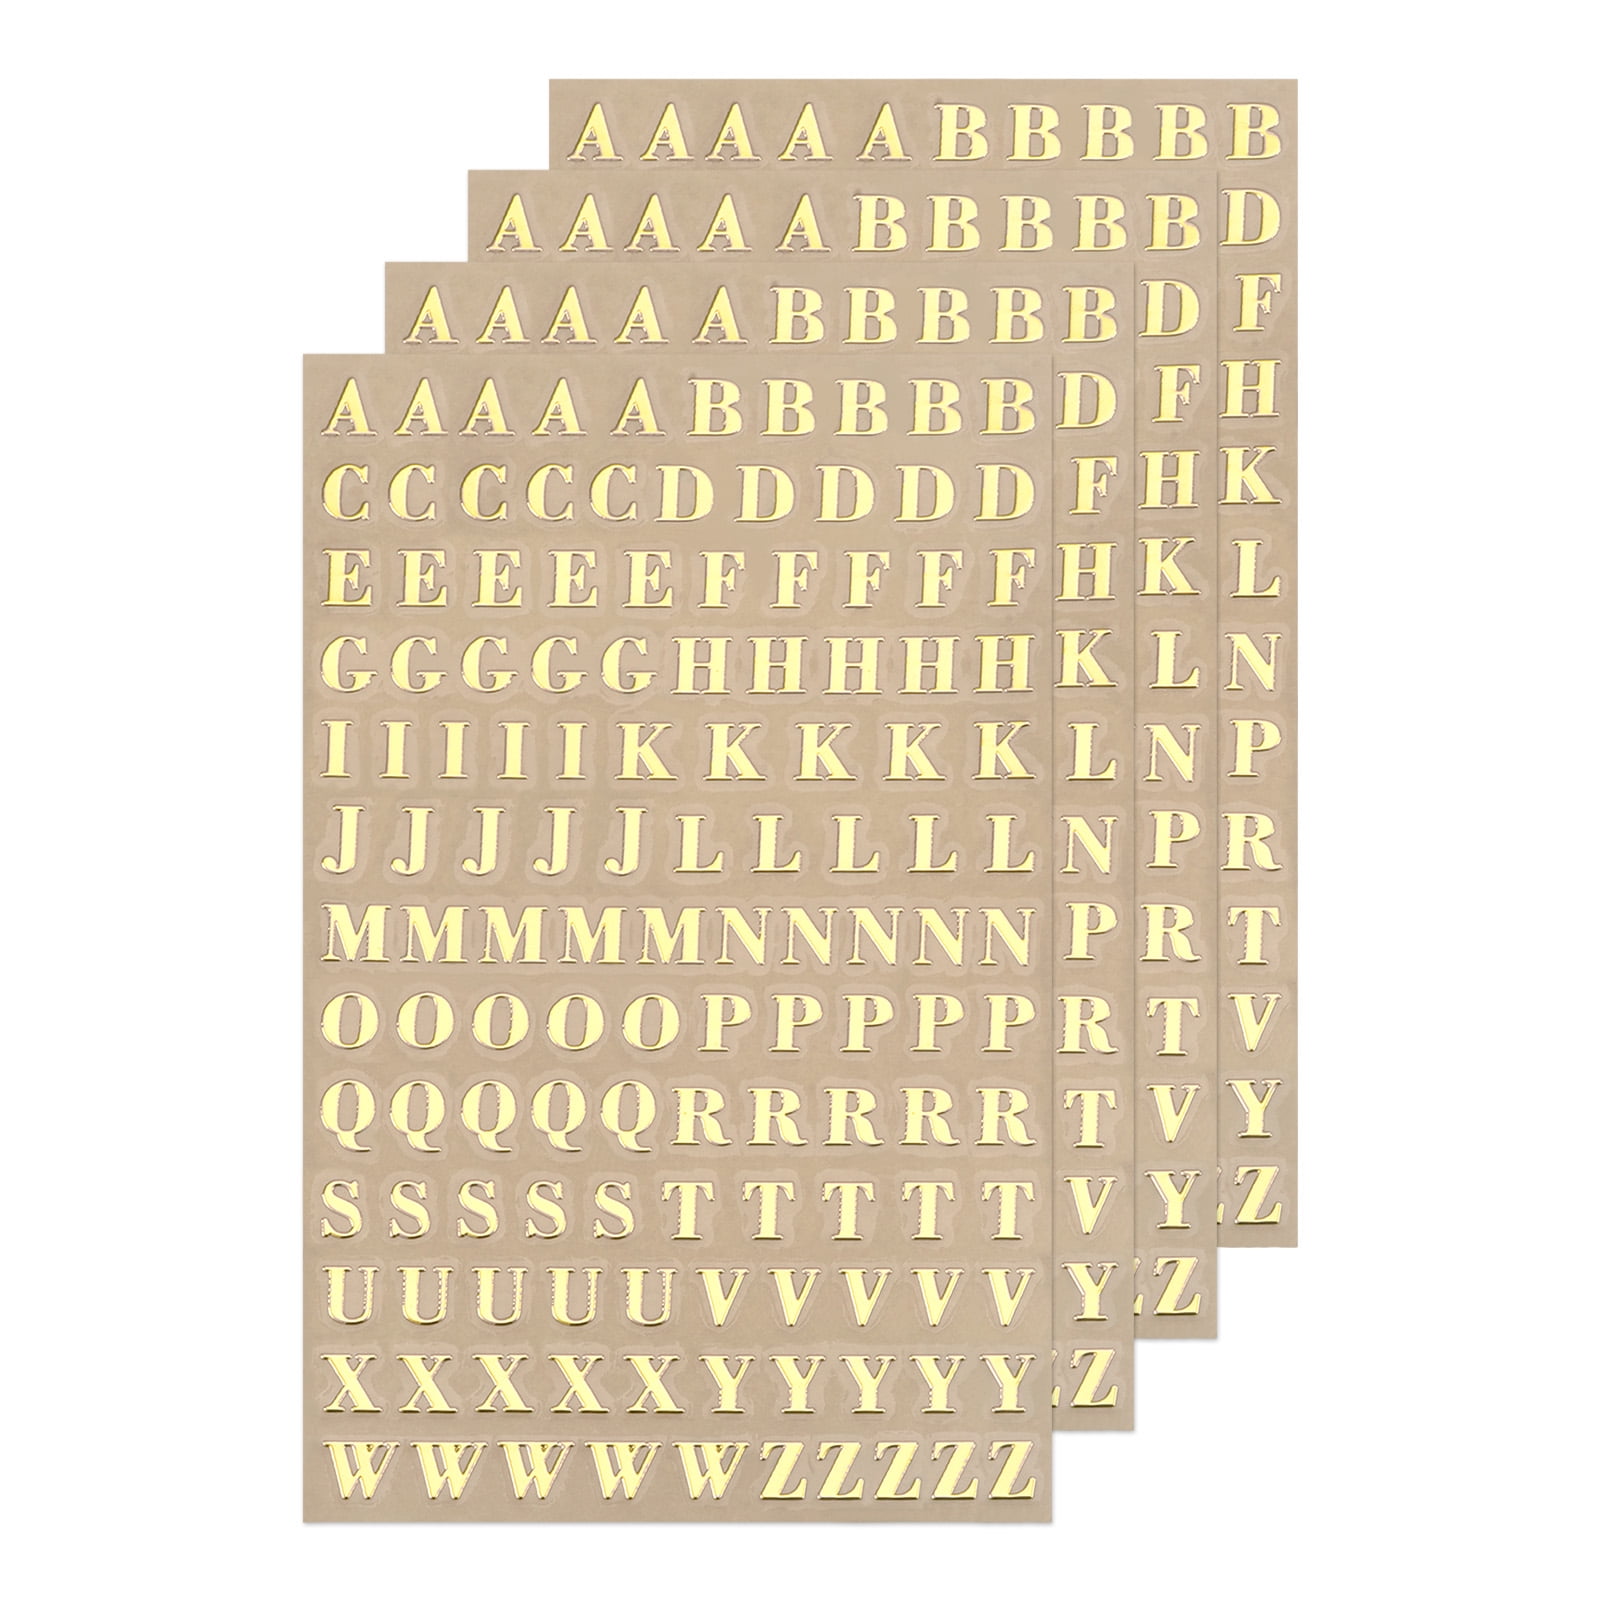 Alphabet Stickers and Rhinestone Stickers for Decoration and DIY Crafts, Glitter Alphabet Stickers for Kids, Teachers, Students. (Gold)